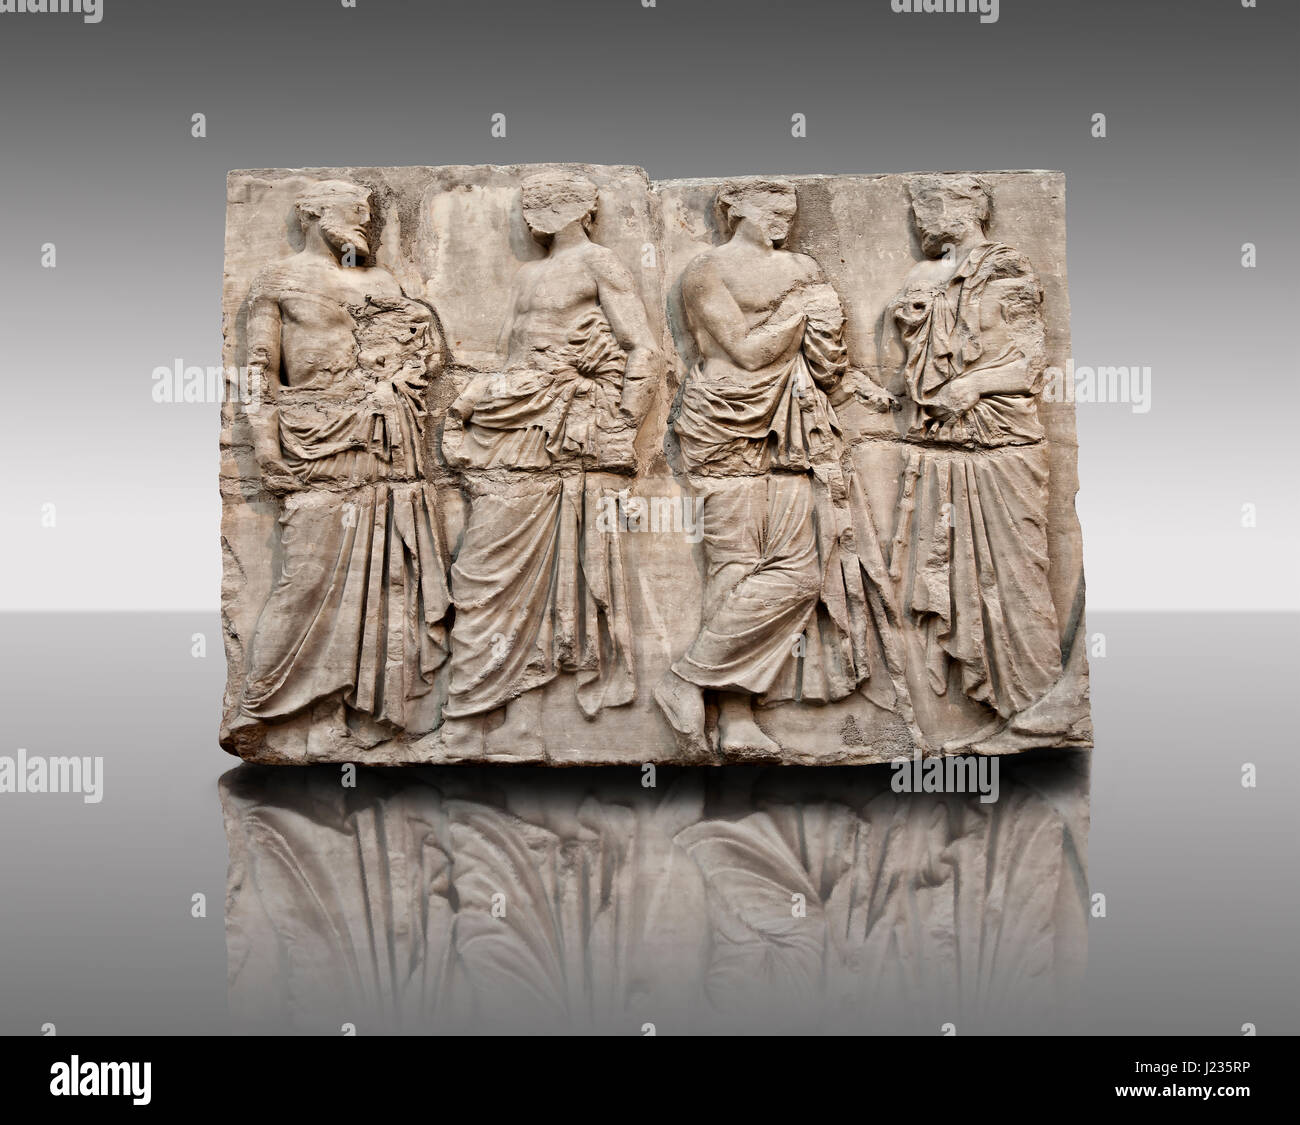 Marble Releif Sculptures from the Parthenon of the Acropolis Athens.  British Museum, London Stock Photo